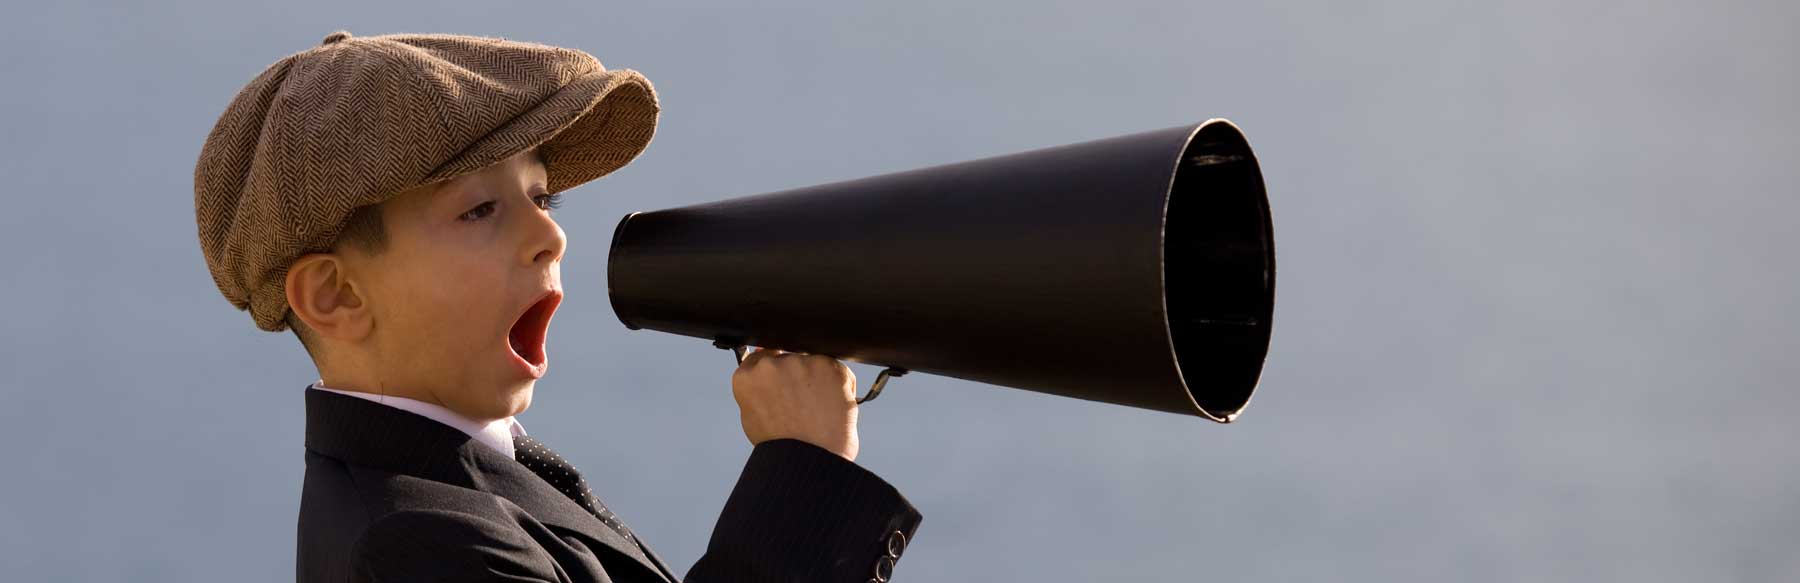 News and Events - photo of kid with megaphone